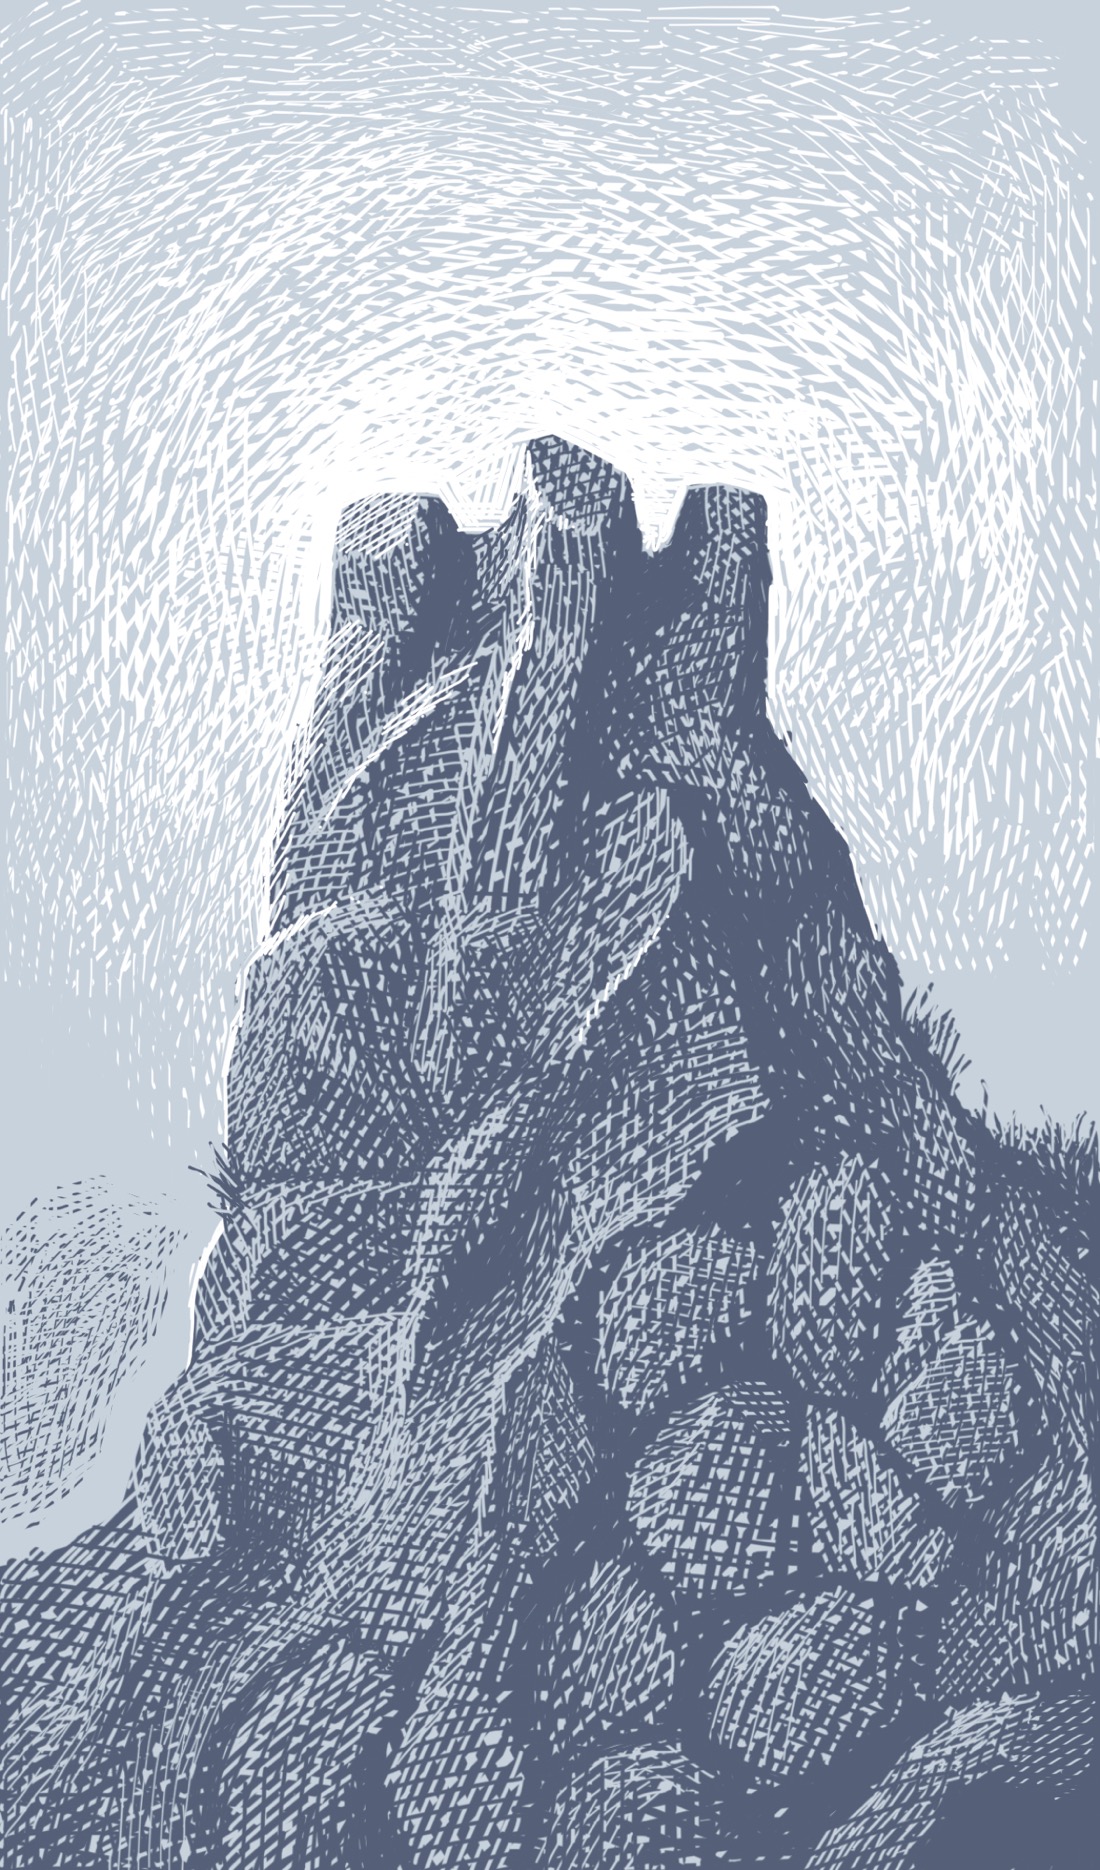 A spike-shaped, rocky mound with three protrusions at the top, sort of like a rough, lopsided turret. It's rough enough to look like a natural formation, but weird enough to make you wonder. above it is a hazy blaze of light, as though something divine is about to appear on the turret.